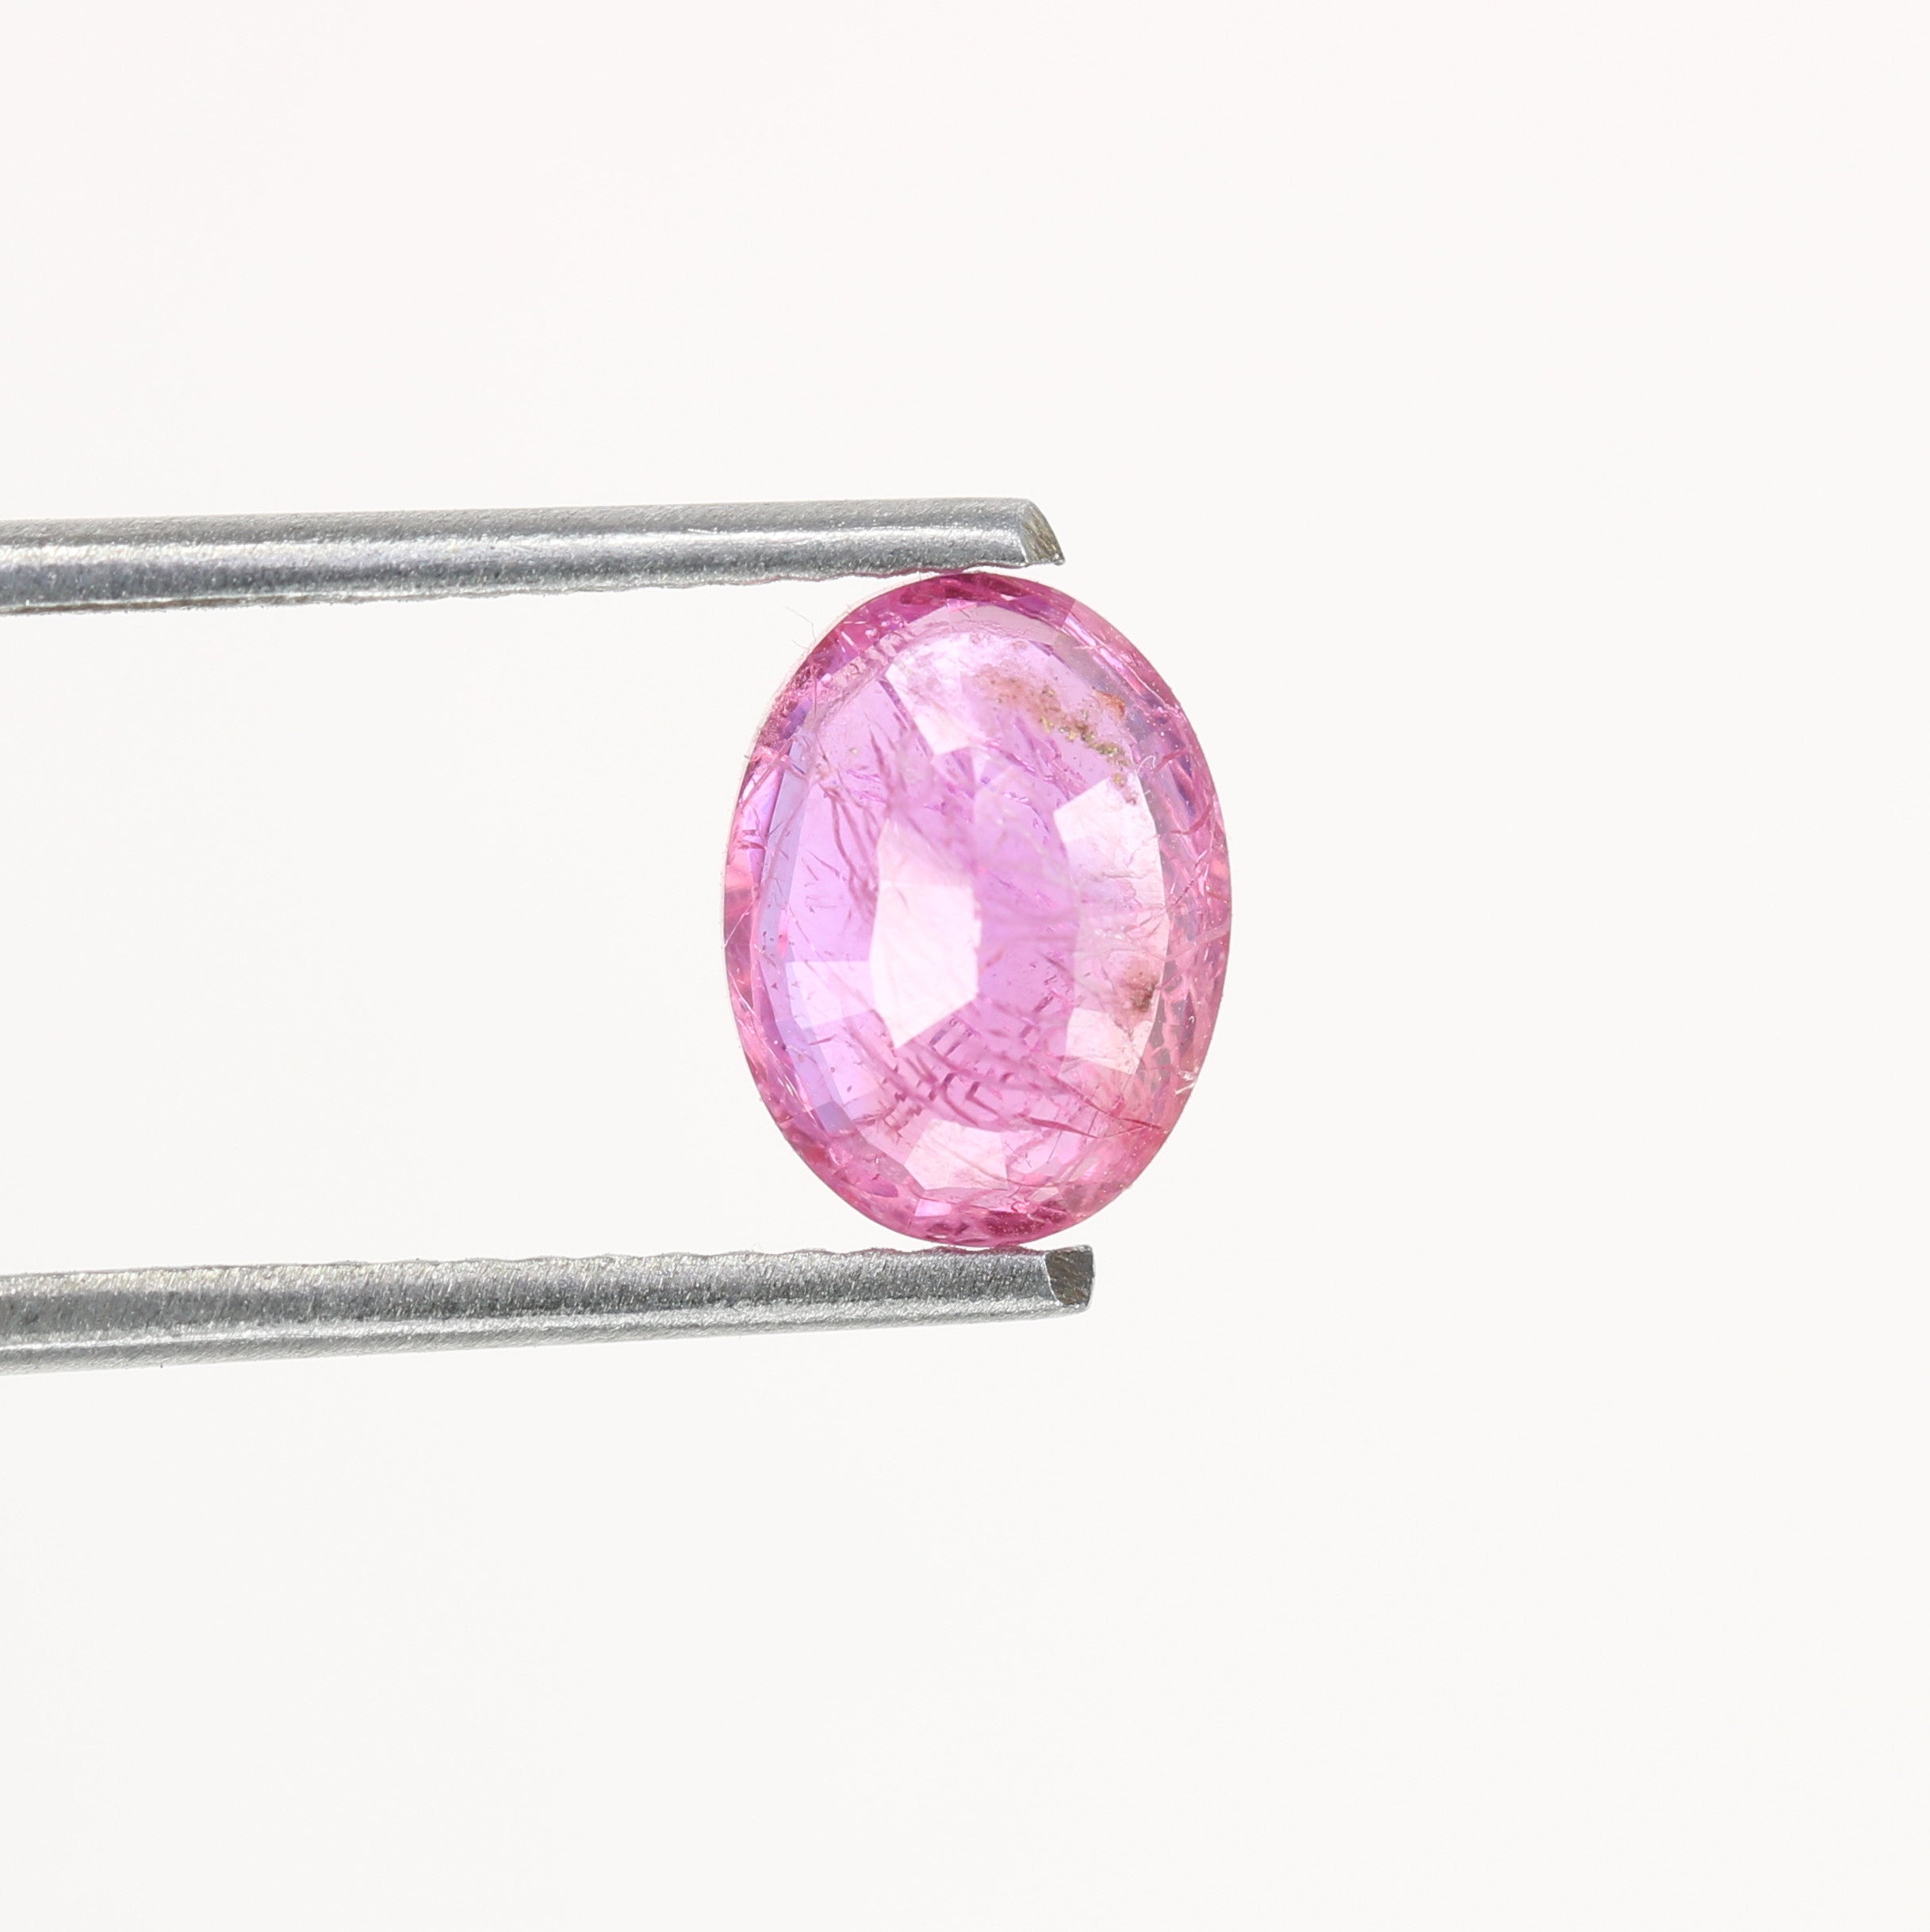 1.97 CT Oval Shape Loose Ruby Sapphire Gemstone For Designer Jewelry